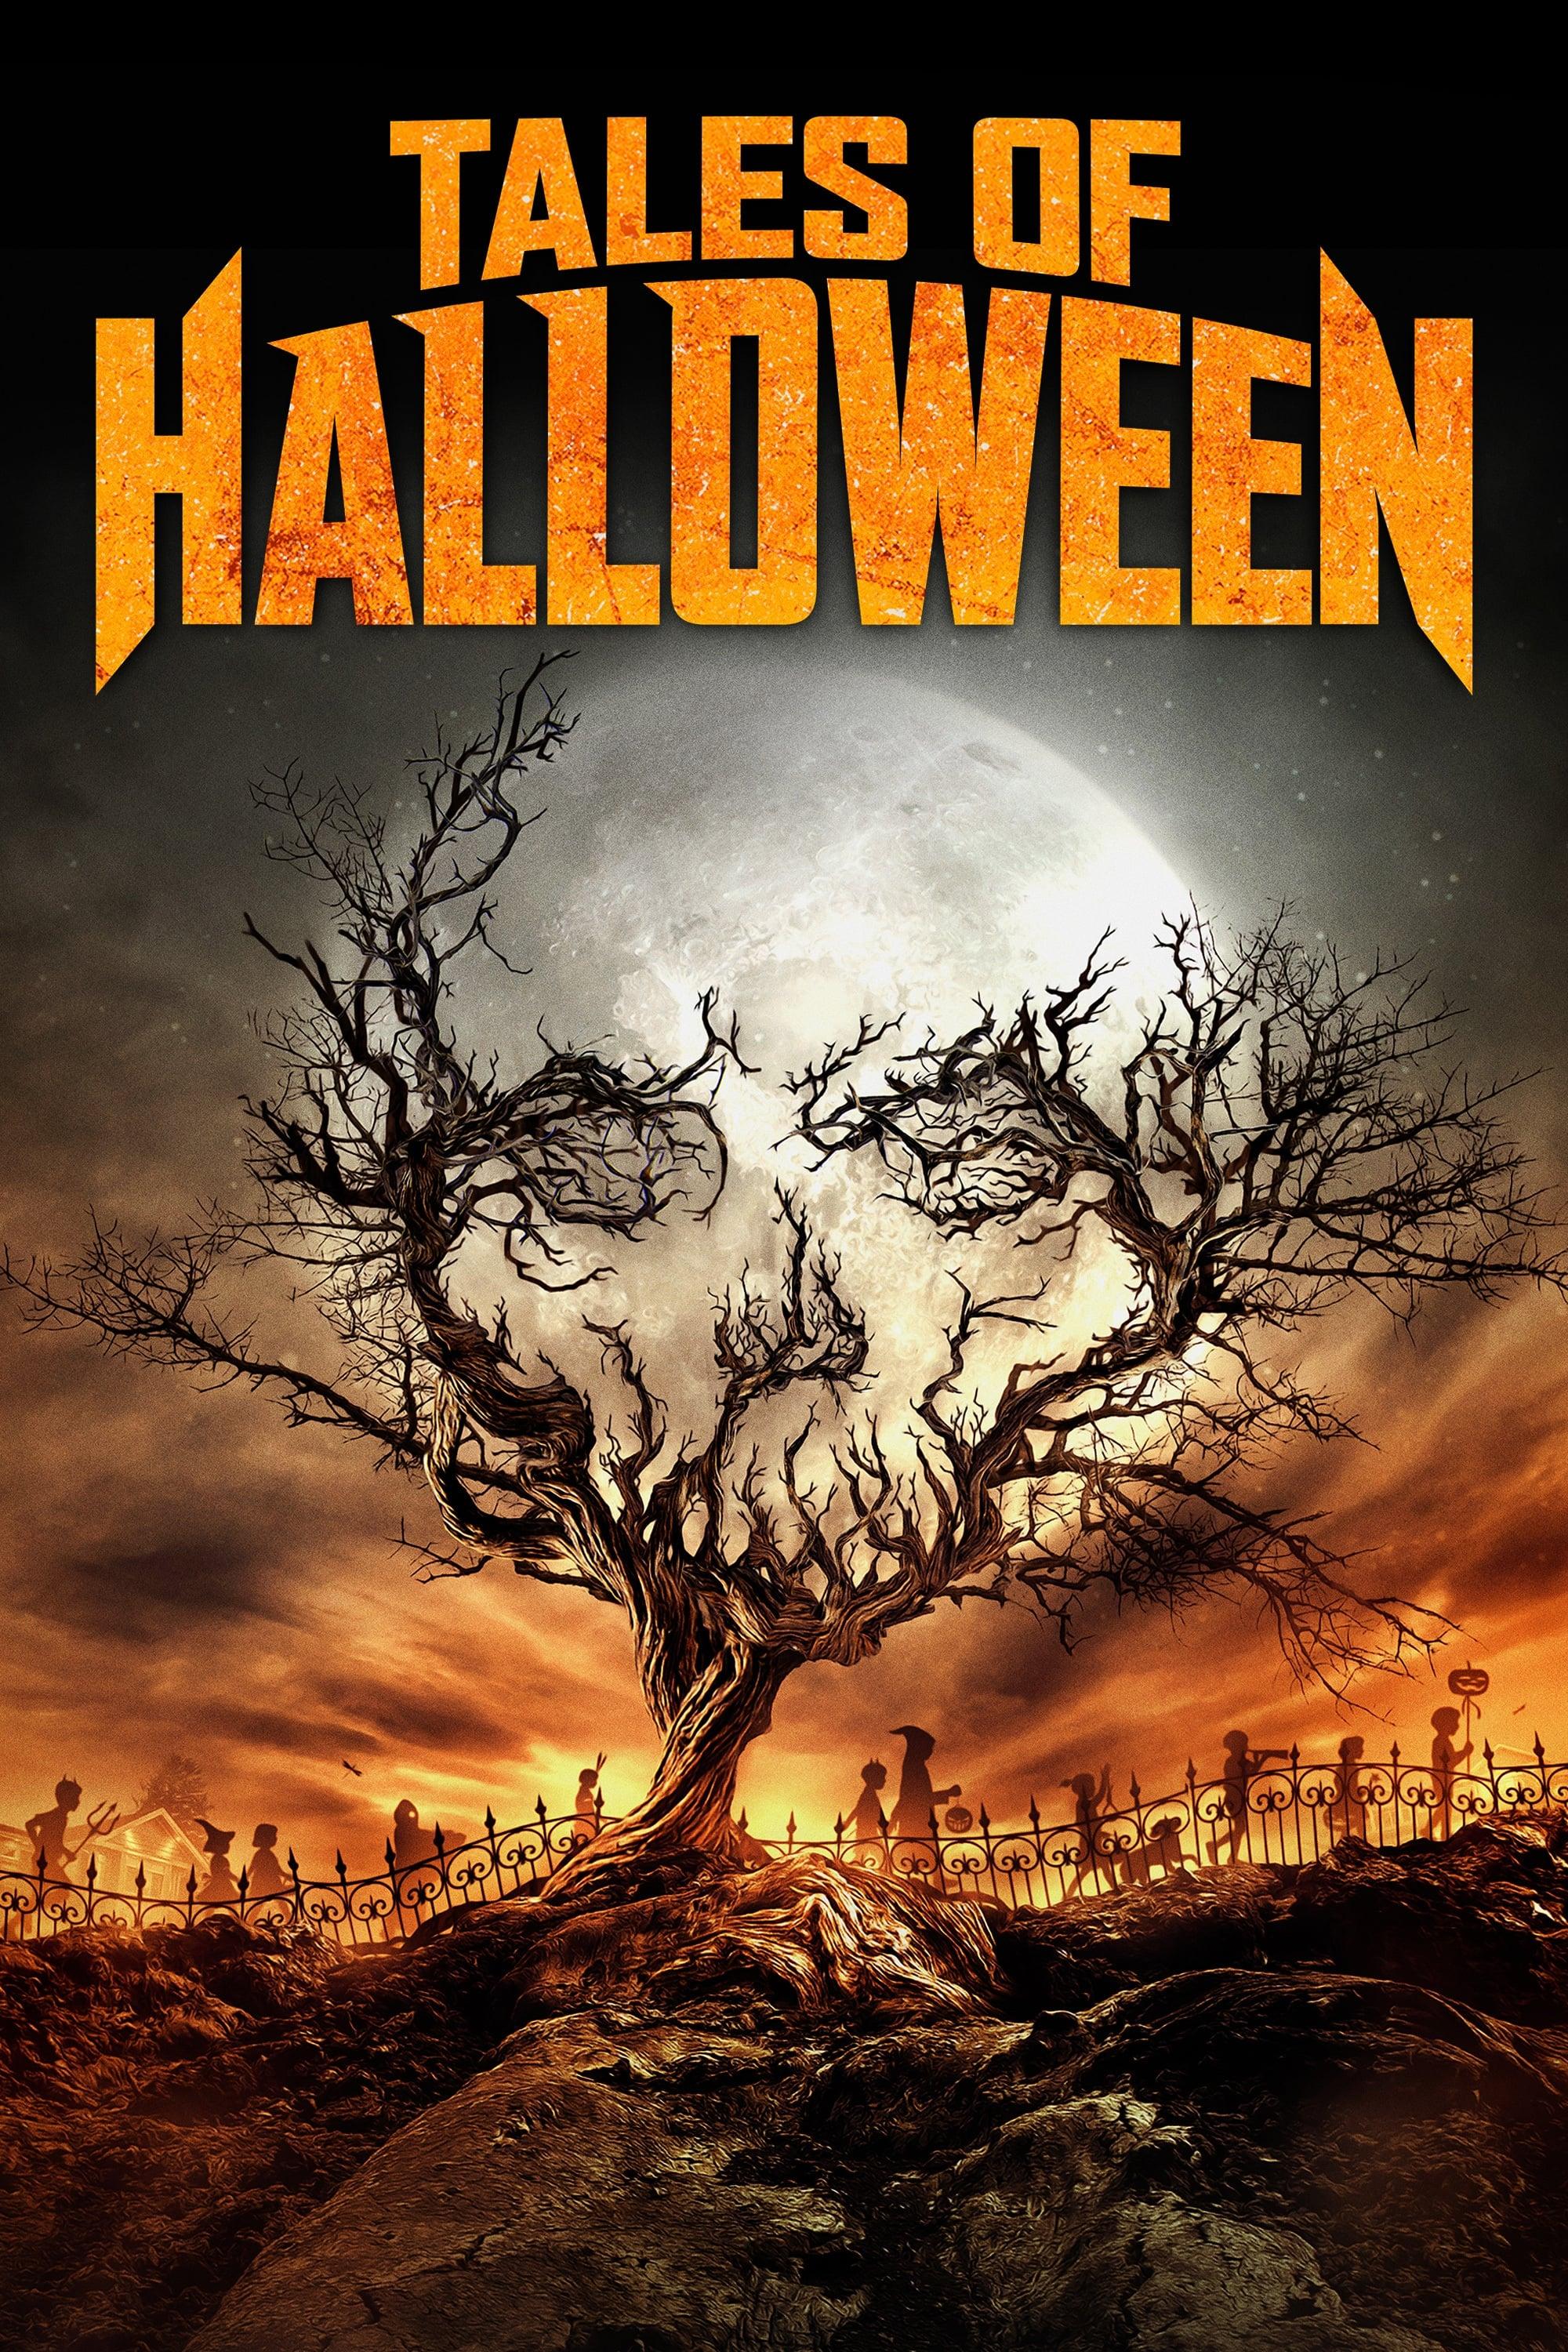 Tales of Halloween poster